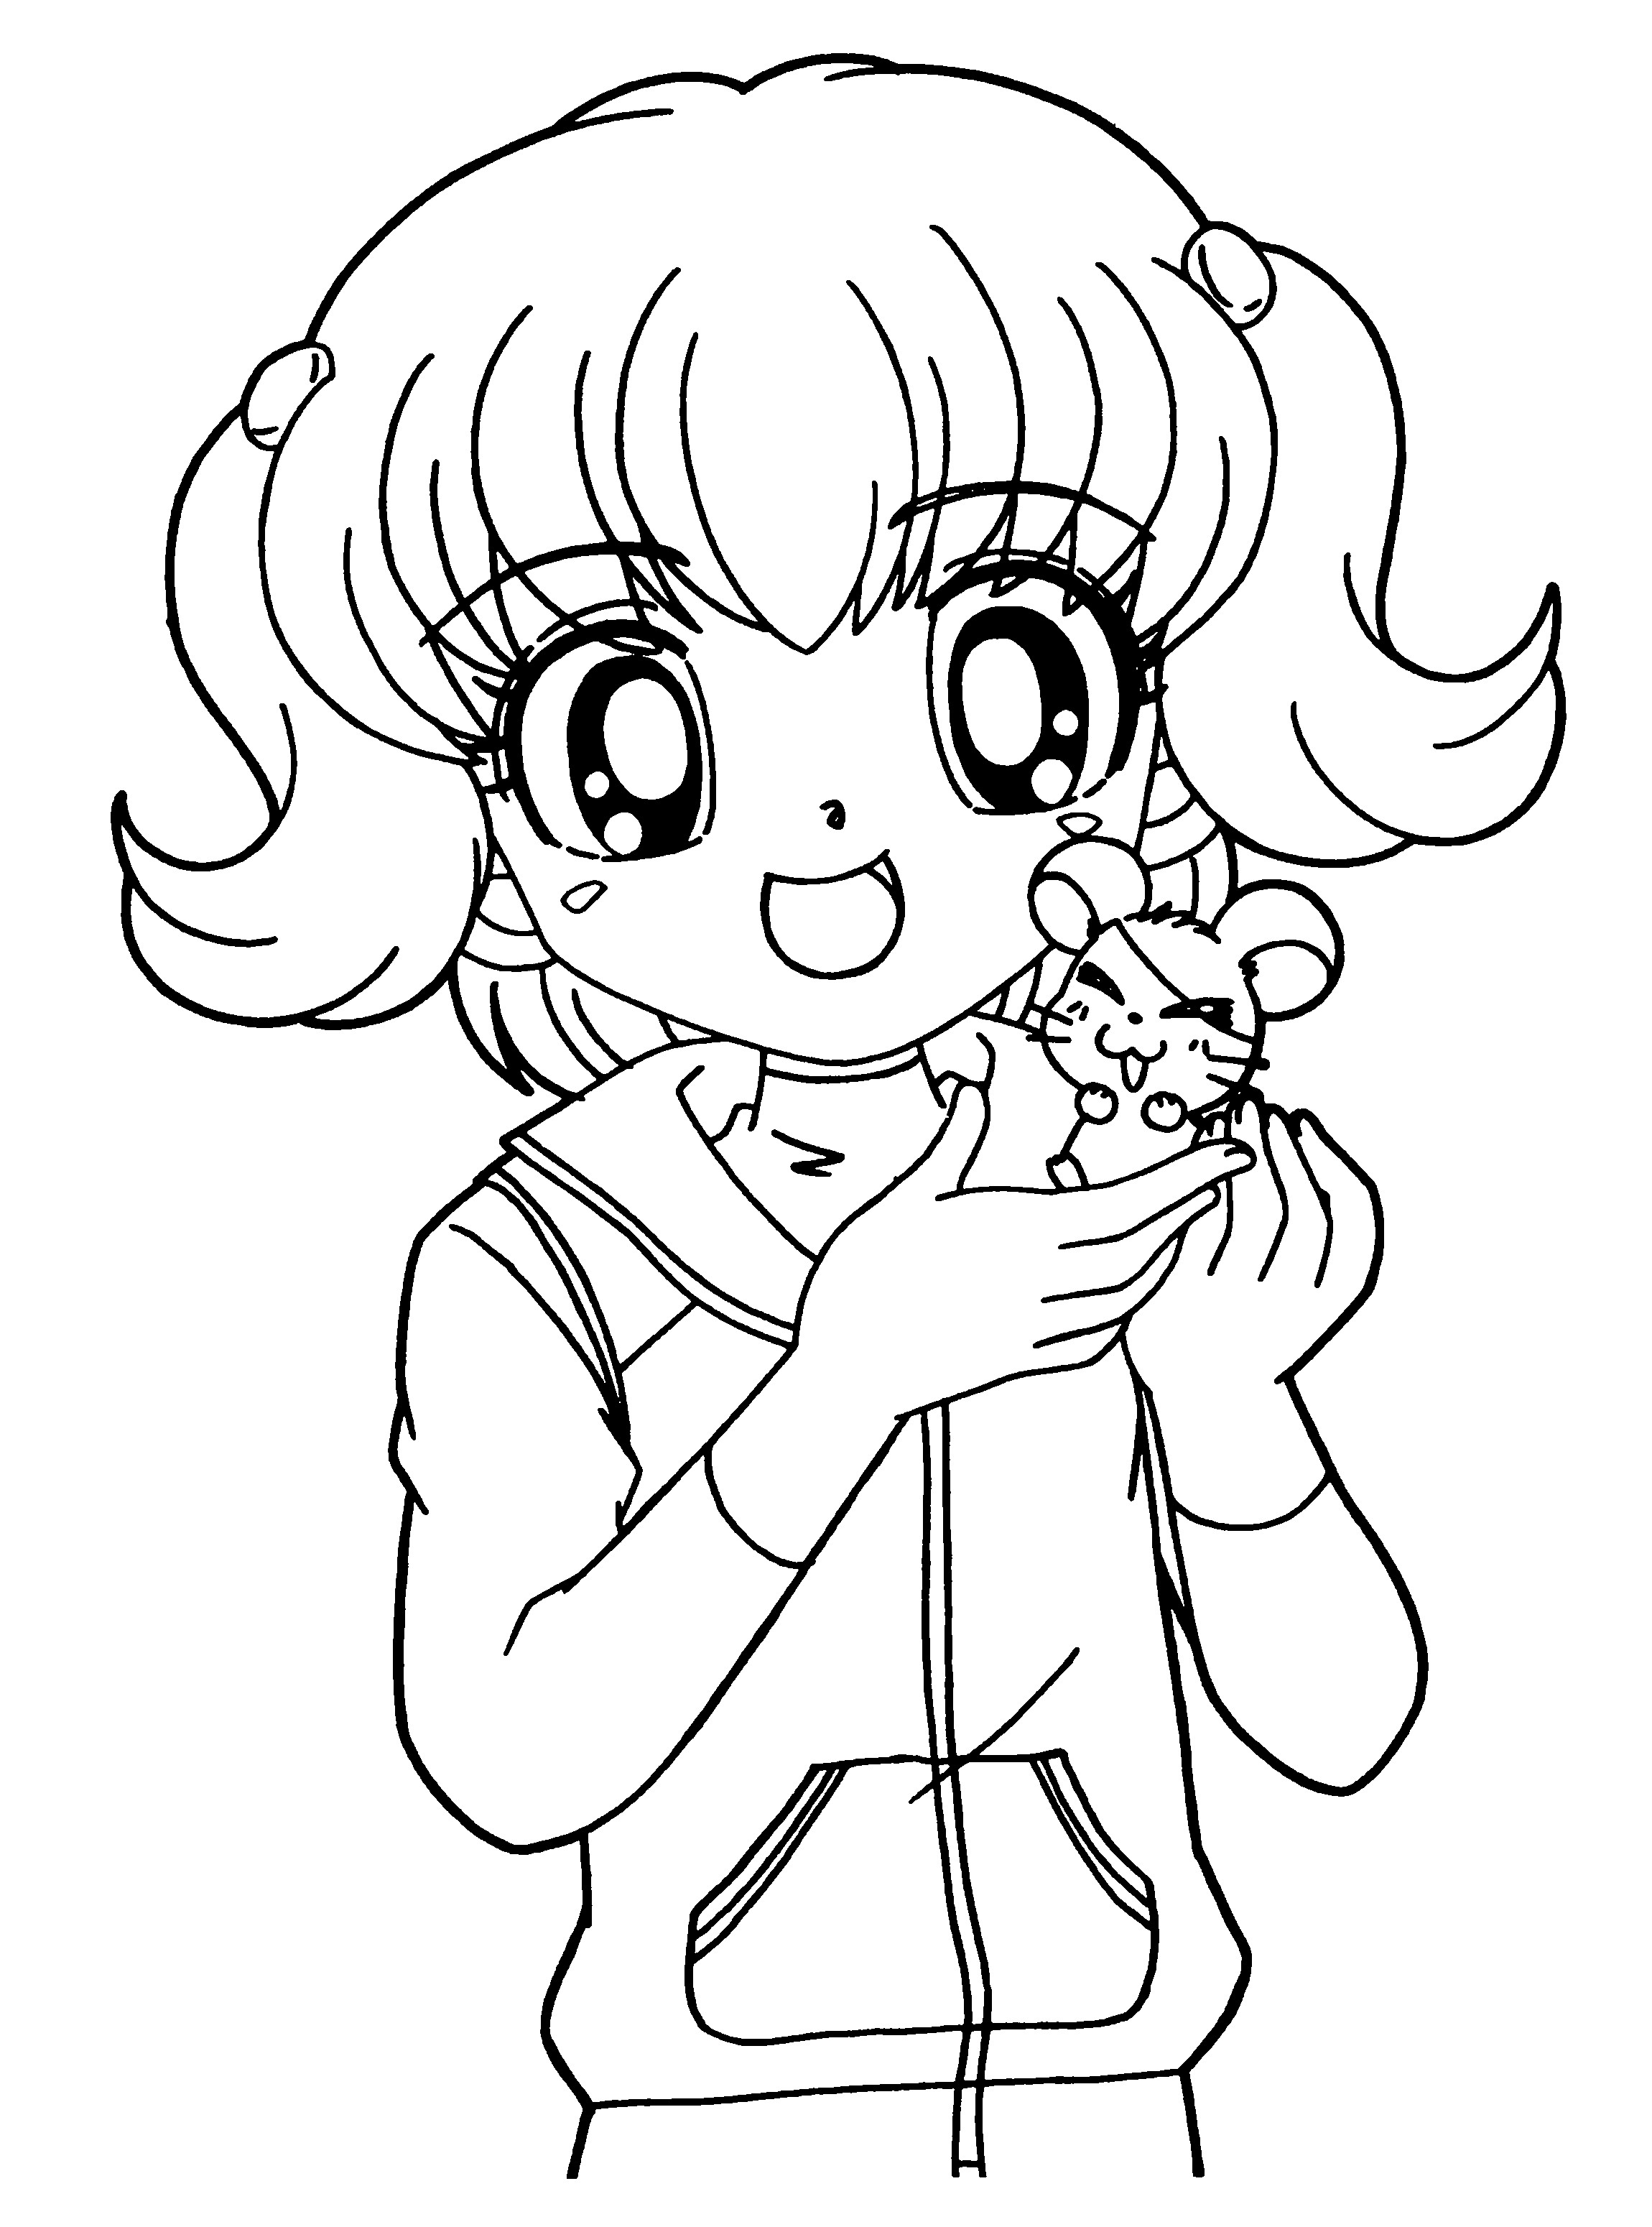 Printable Cute Coloring Pages For Boys
 Anime Coloring Pages Best Coloring Pages For Kids